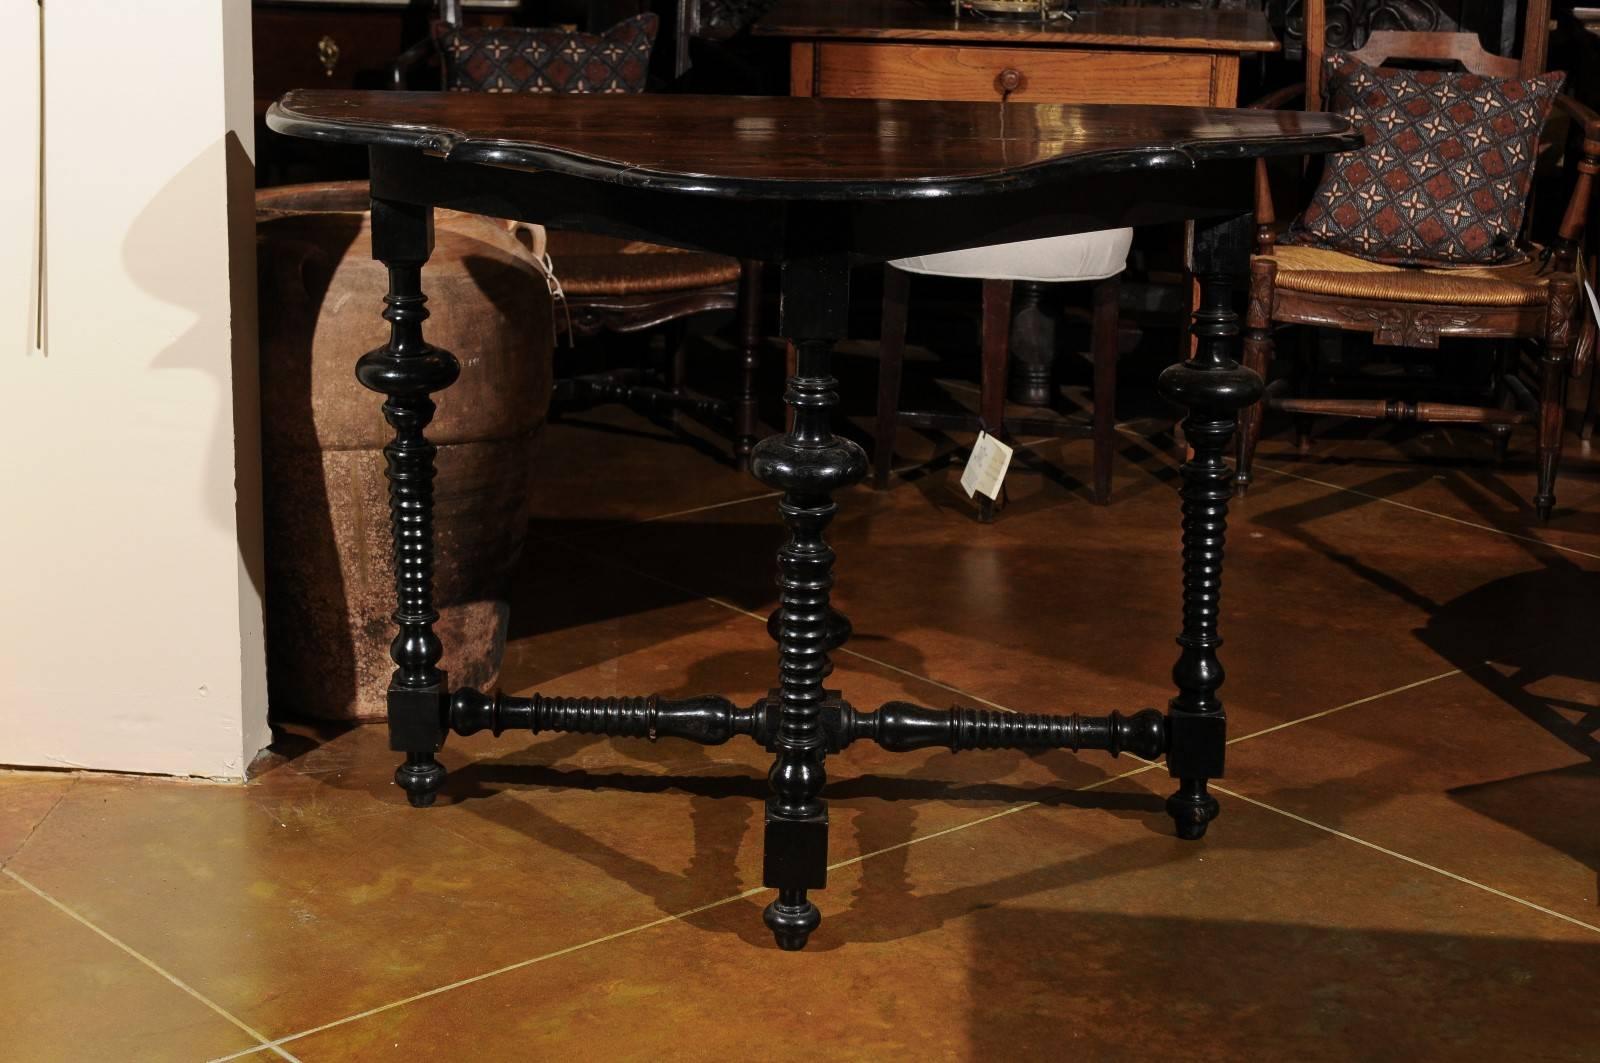 Italian 18th century console table in the Louis XIII style with serpentine form, walnut top and ebonized turned legs and stretcher.